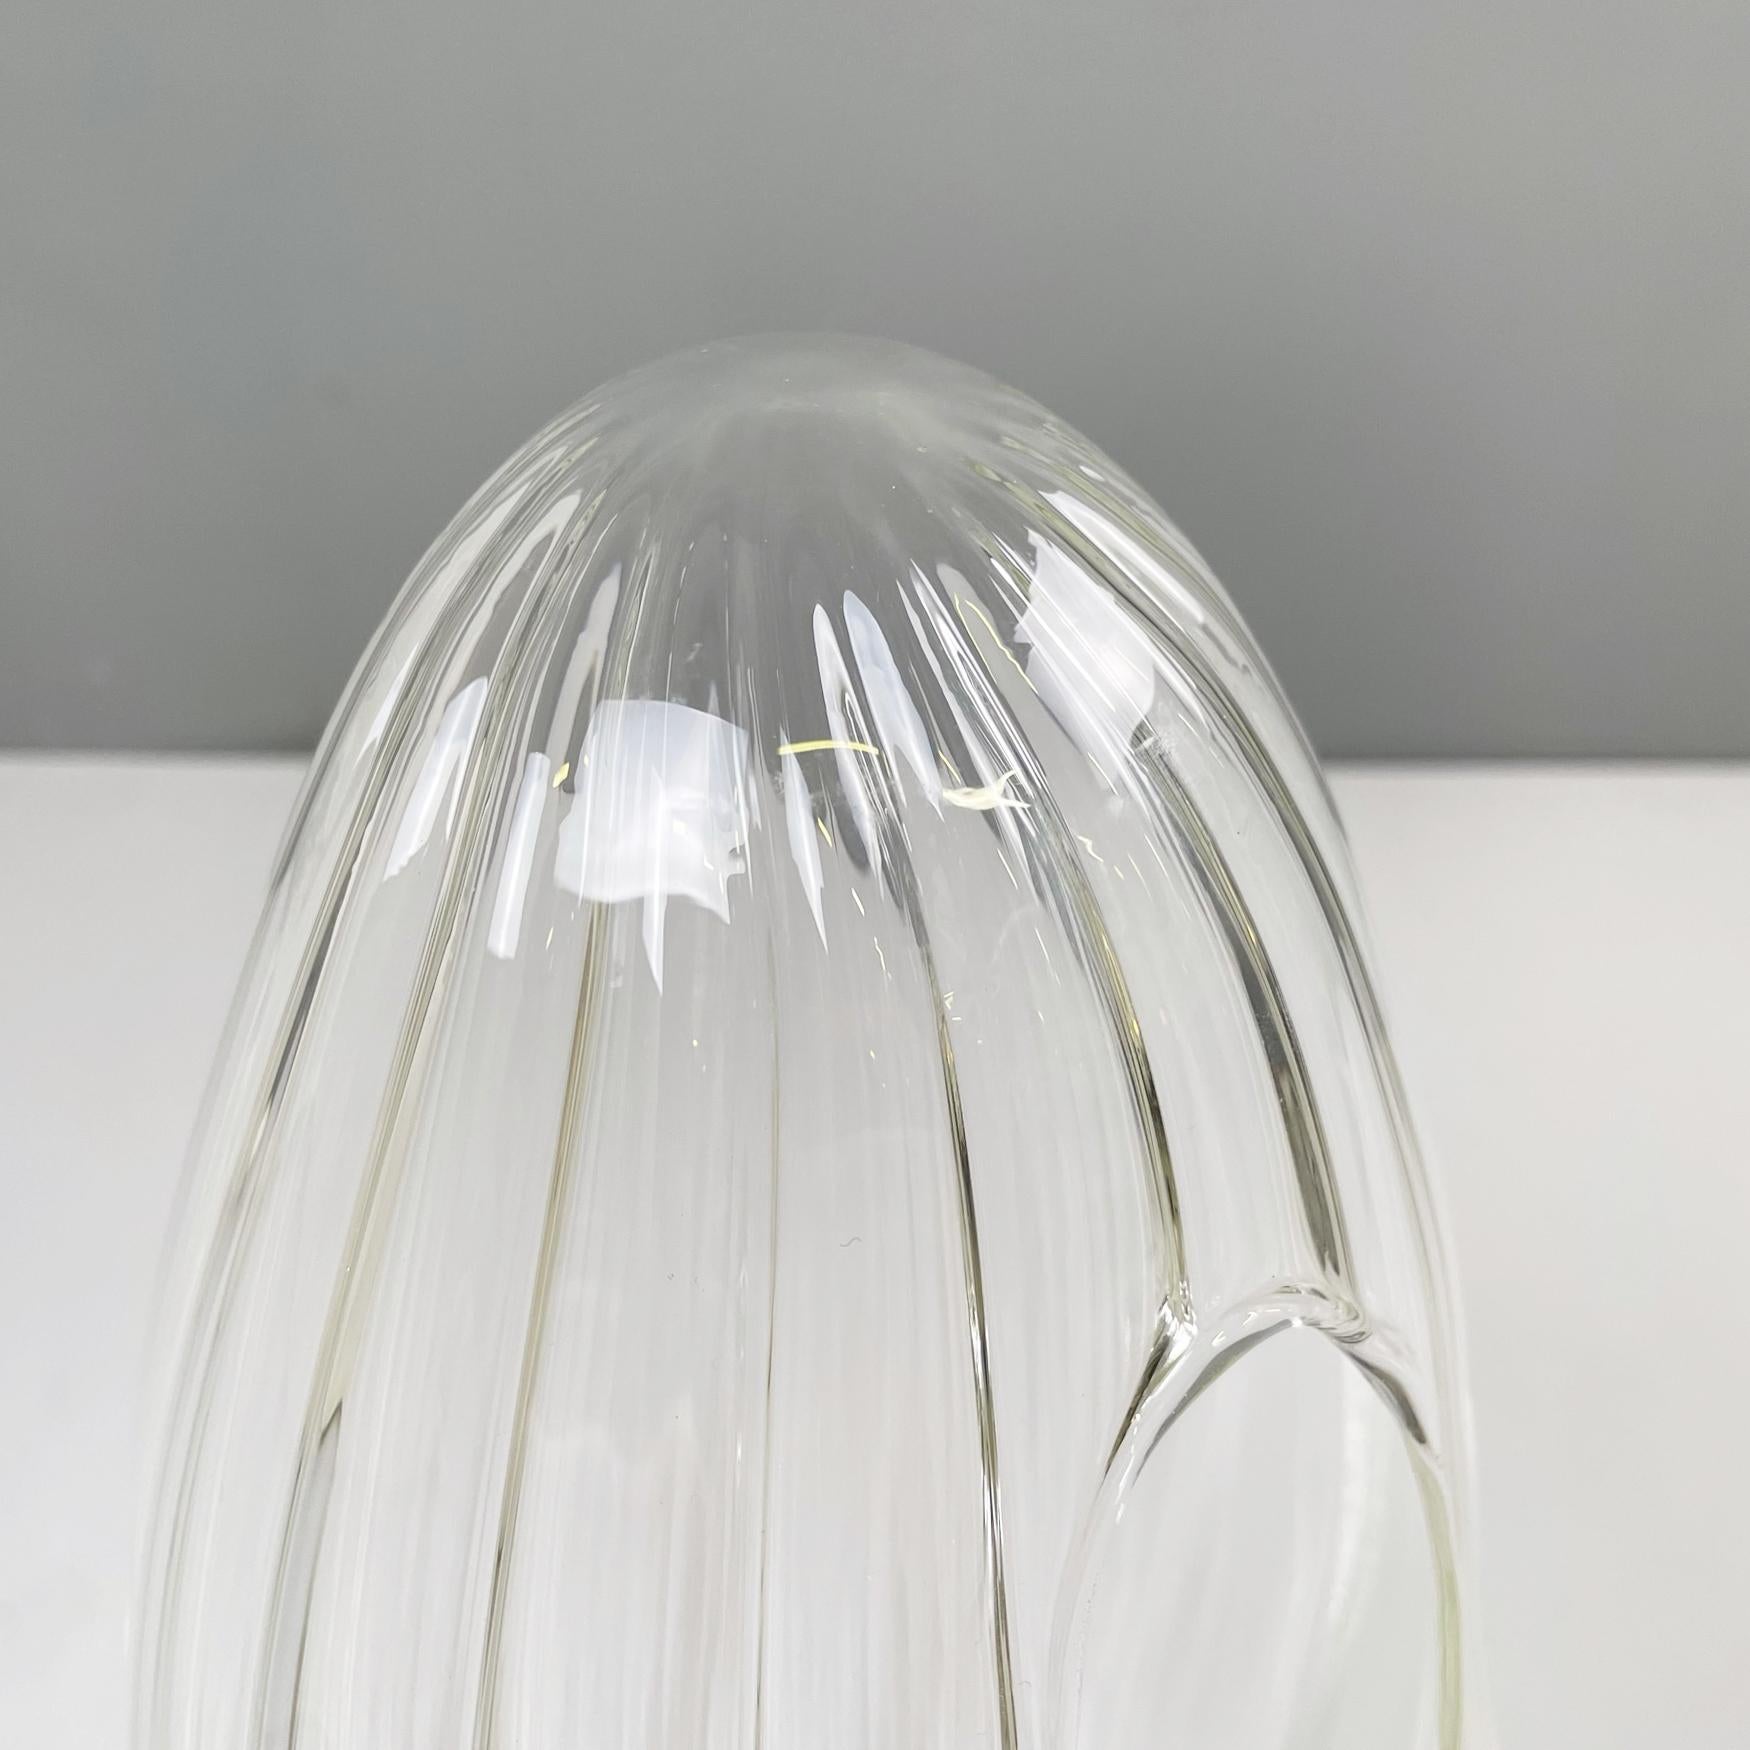 Late 20th Century Italian modern Glass vase with round seed shape by Roberto Faccioli, 1990s For Sale